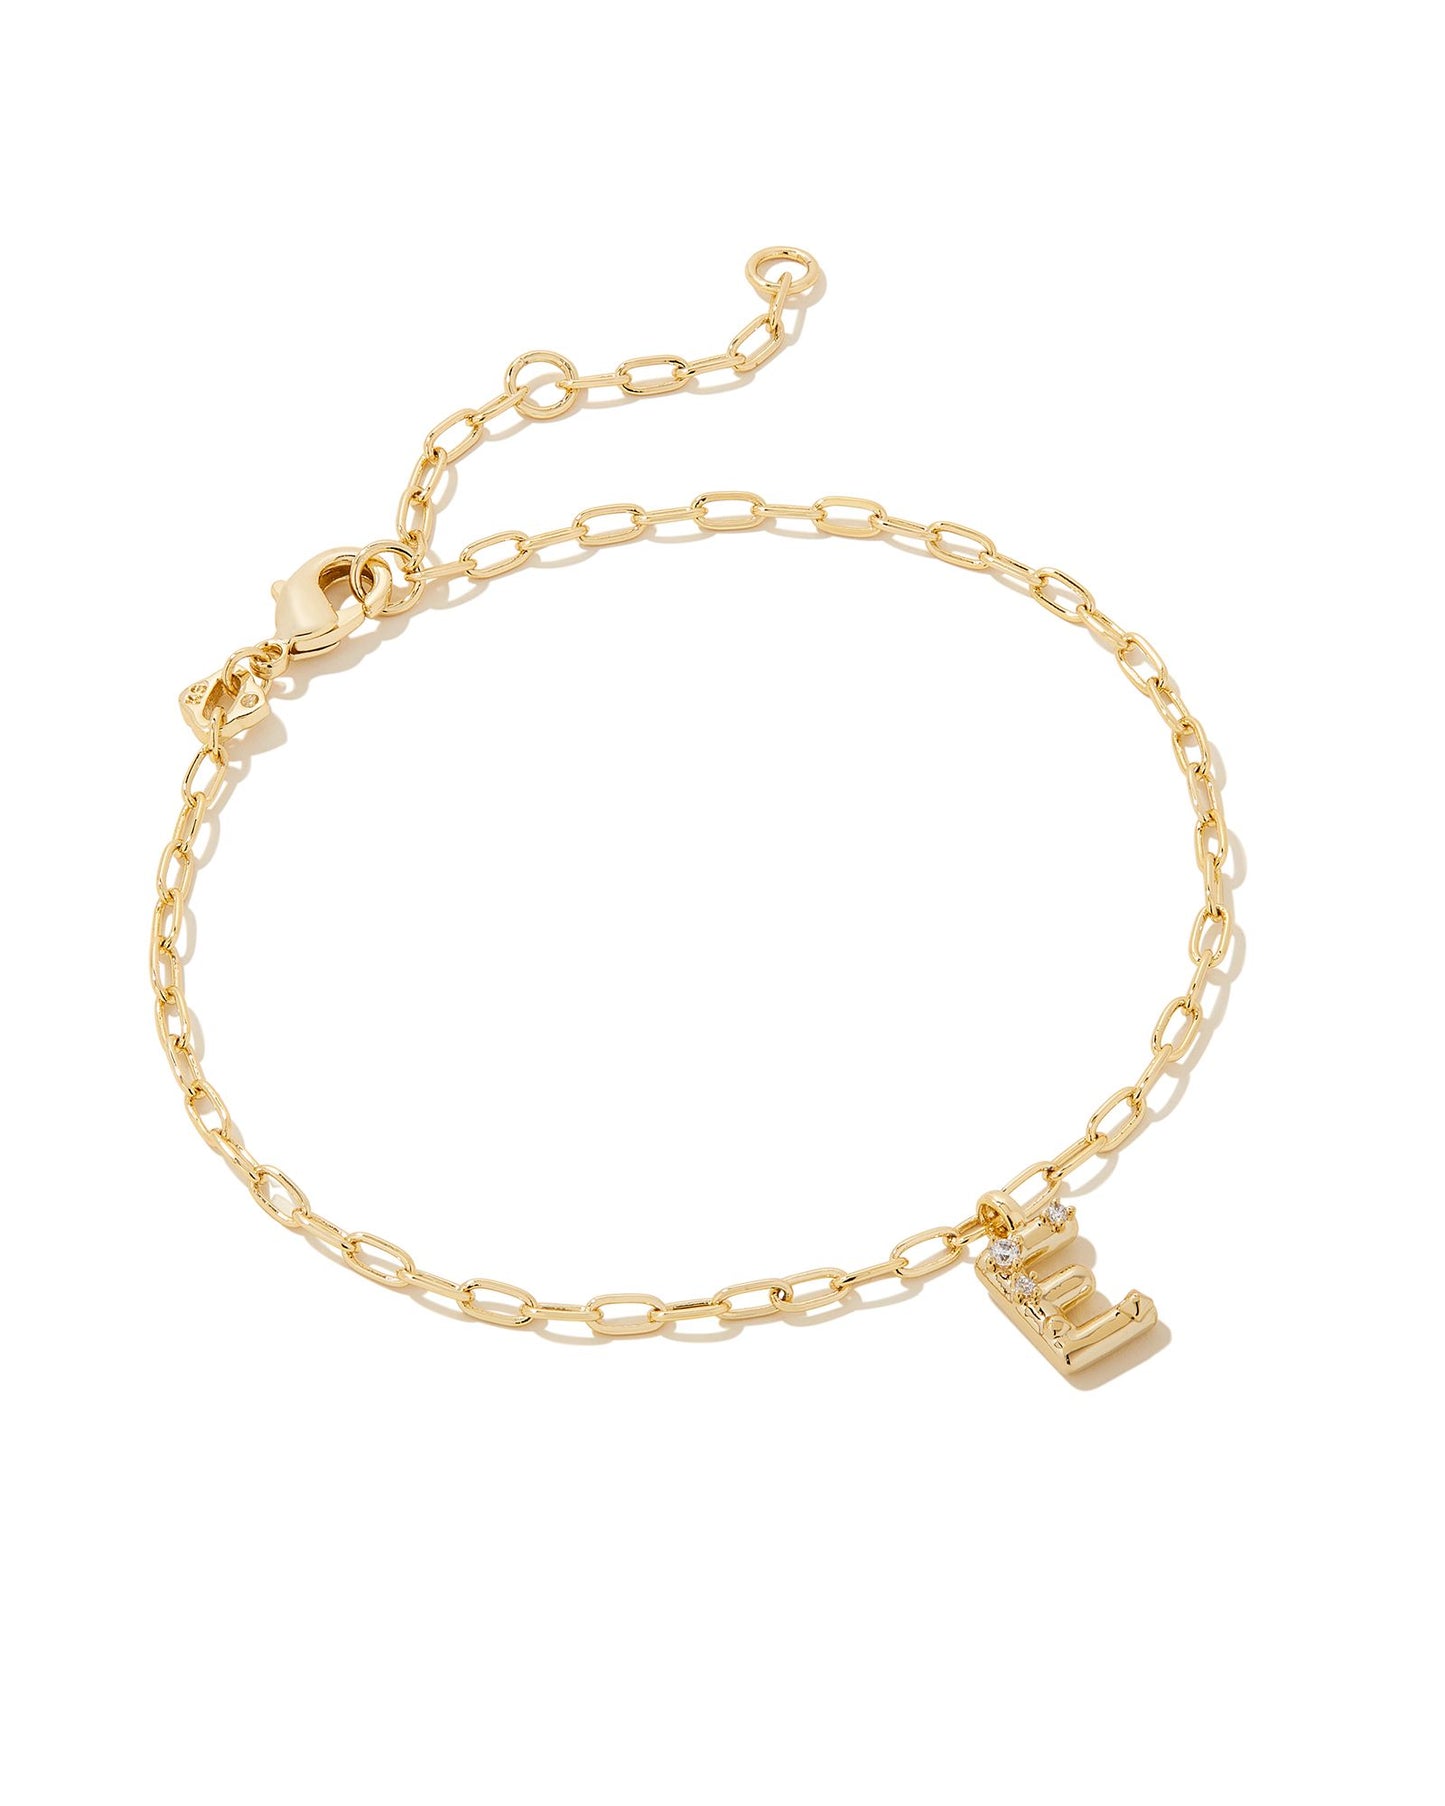 Add a personal touch to your wrist stack with the Crystal Delicate Chain Bracelet in White Crystal, our first Fashion Jewelry initial bracelet. Featuring a dainty chain and letter charm with a hint of sparkle, this bracelet is the perfect way to celebrate the ones you love—including yourself!  Dimensions- 6.5' CHAIN WITH 1.5' EXTENDER, 0.45'L X 0.26"W PENDANT Metal- 14K Gold plated over brass Closure- Lobster Clasp Material-  White CZ letter E